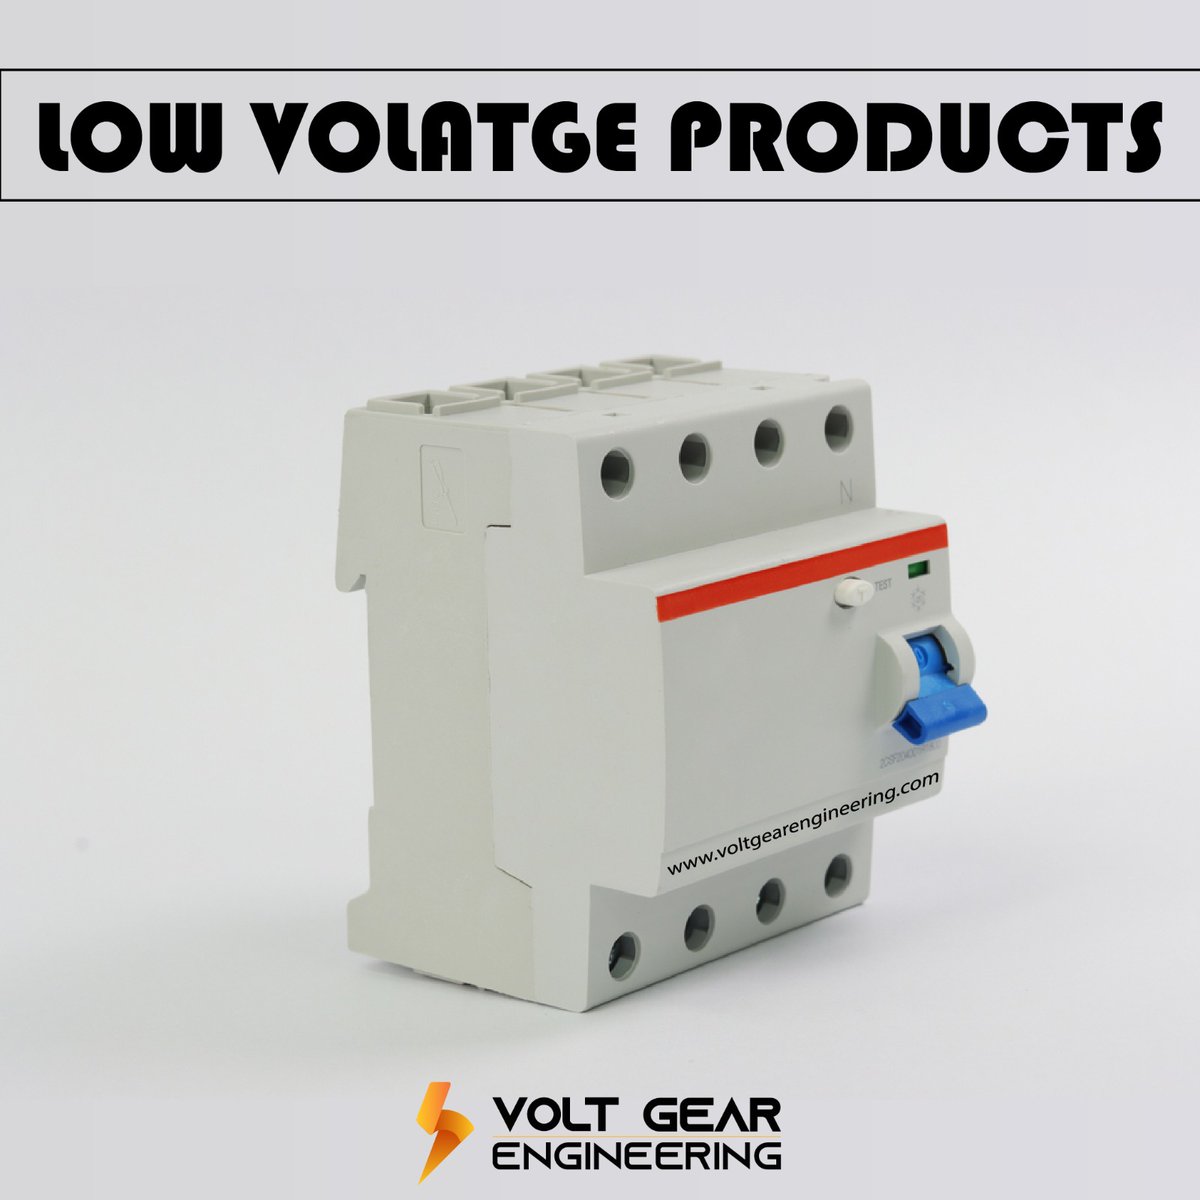 Elevate your engineering projects to new heights with our advanced low voltage products. Discover reliability, efficiency, and quality in every solution we offer. ⚡🔧
.
.
#lowvoltageproducts #voltgearengineering #engineeringsolutions